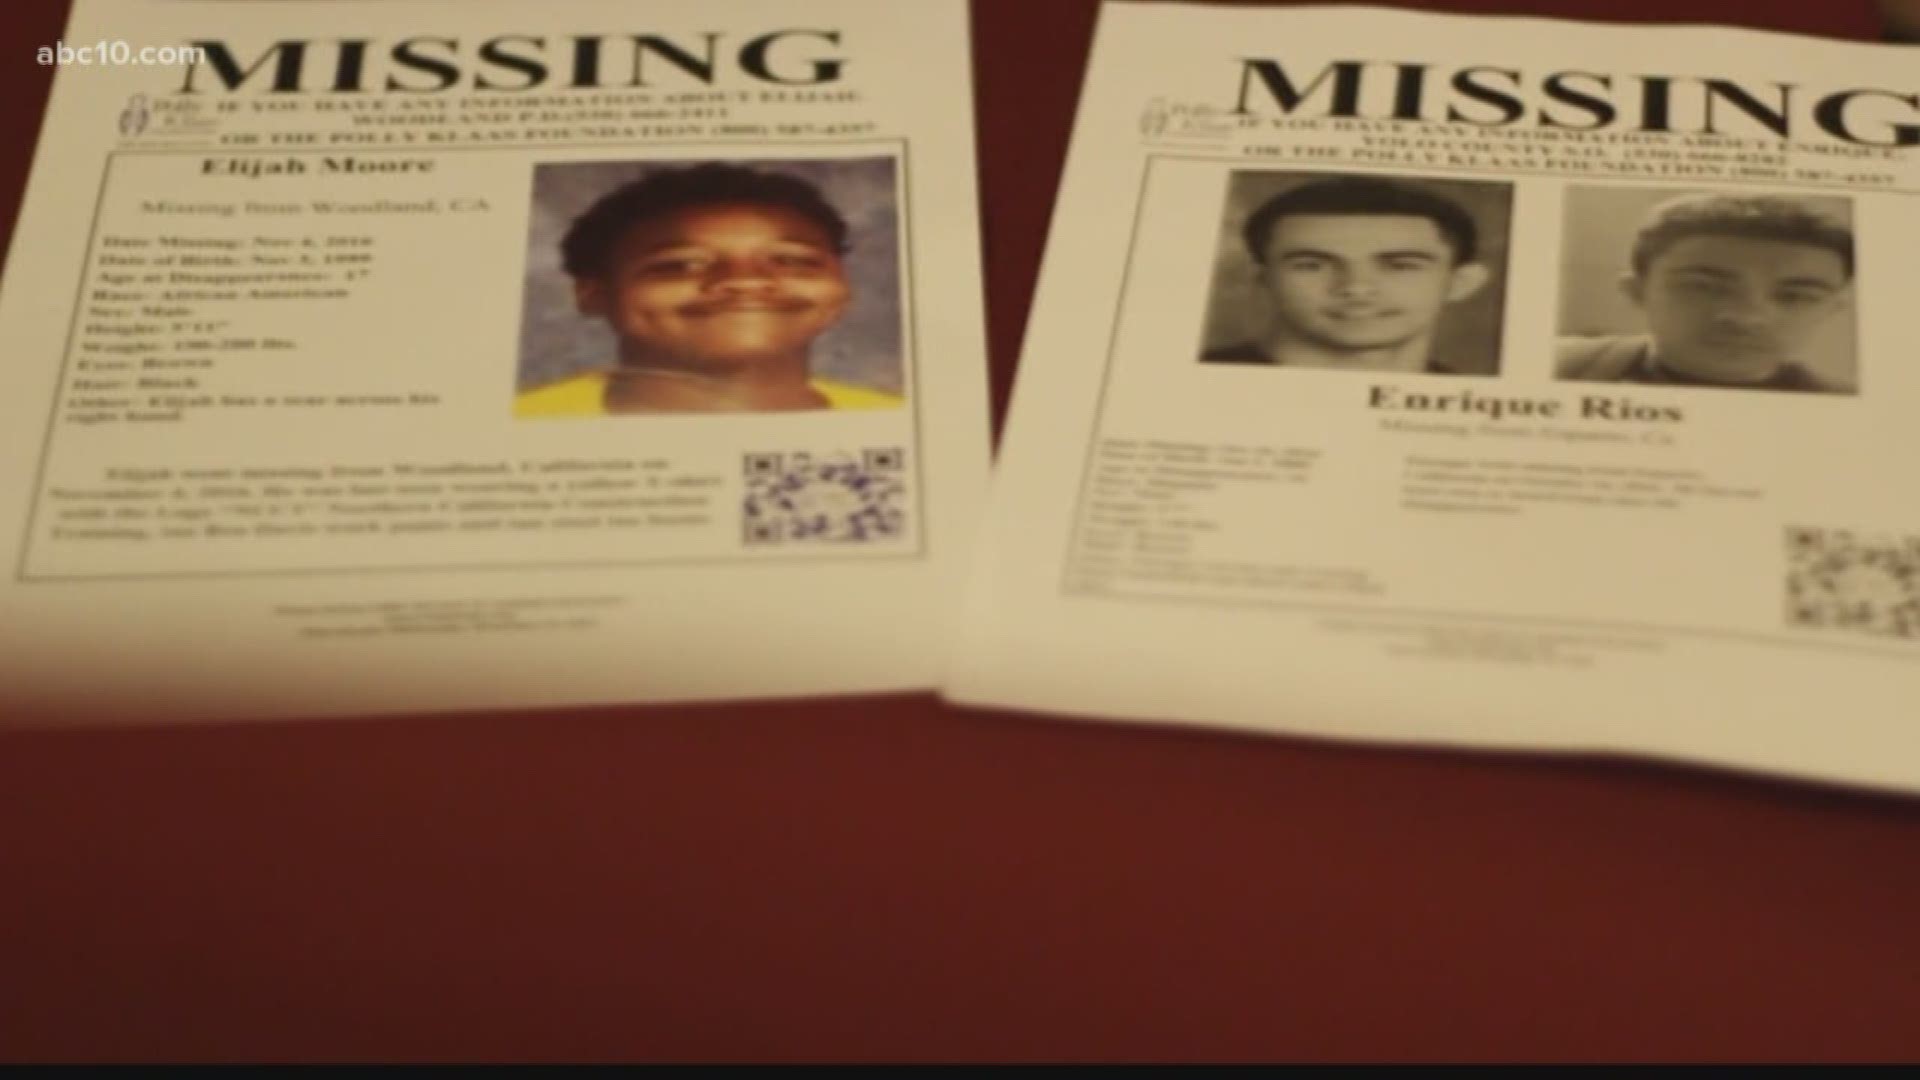 Three arrested for disappearance of two teenagers in Woodland (June 11, 2018)